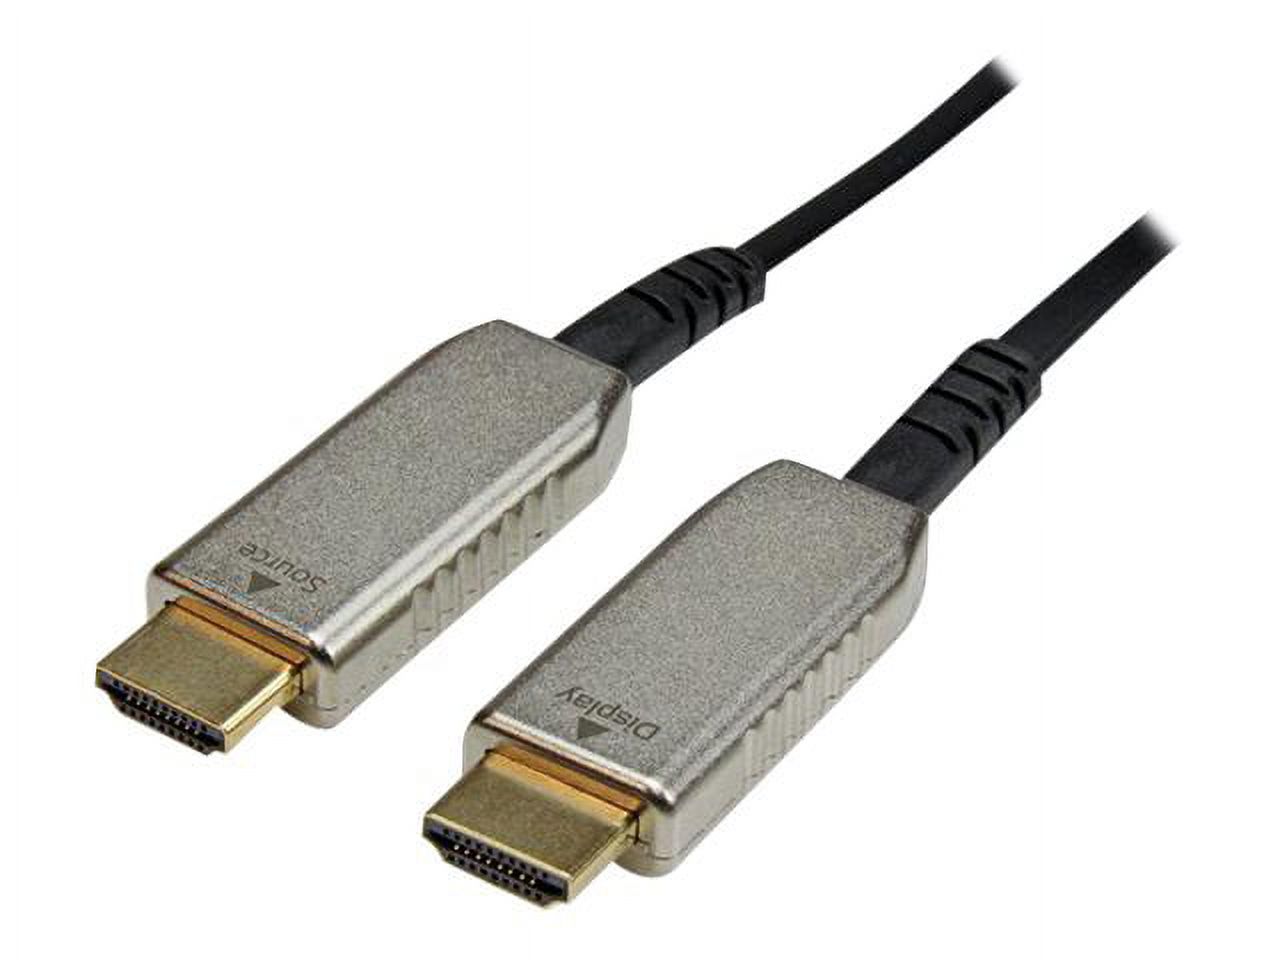 StarTech.com HDMM30MAO 30m (100 ft) Active Fiber Optic AOC High Speed HDMI Cable - Black - image 1 of 7